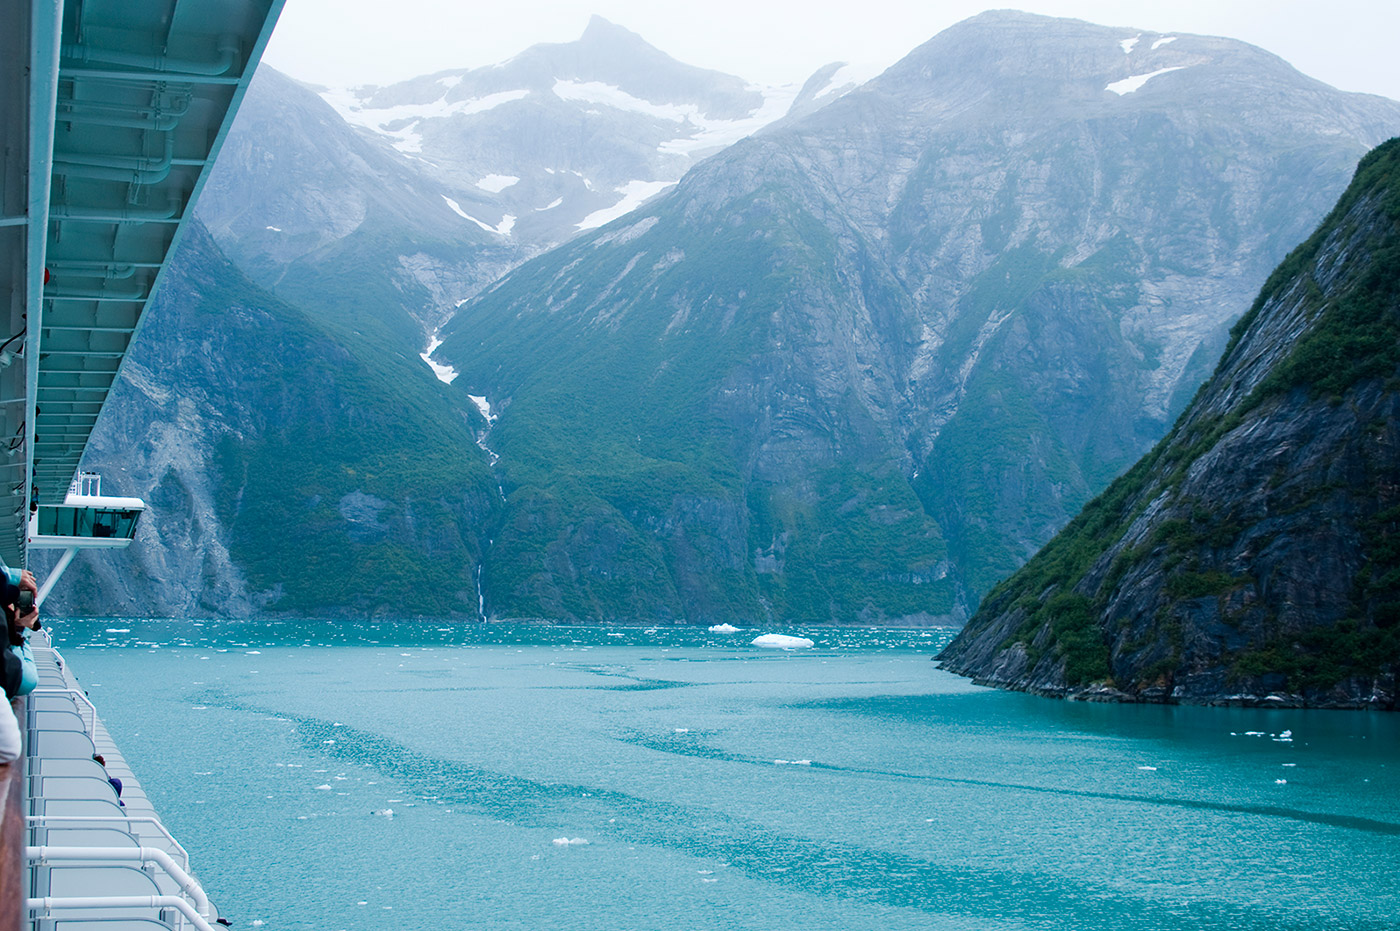 Icy waters and snow-capped mountains from the deck of a cruise ship.